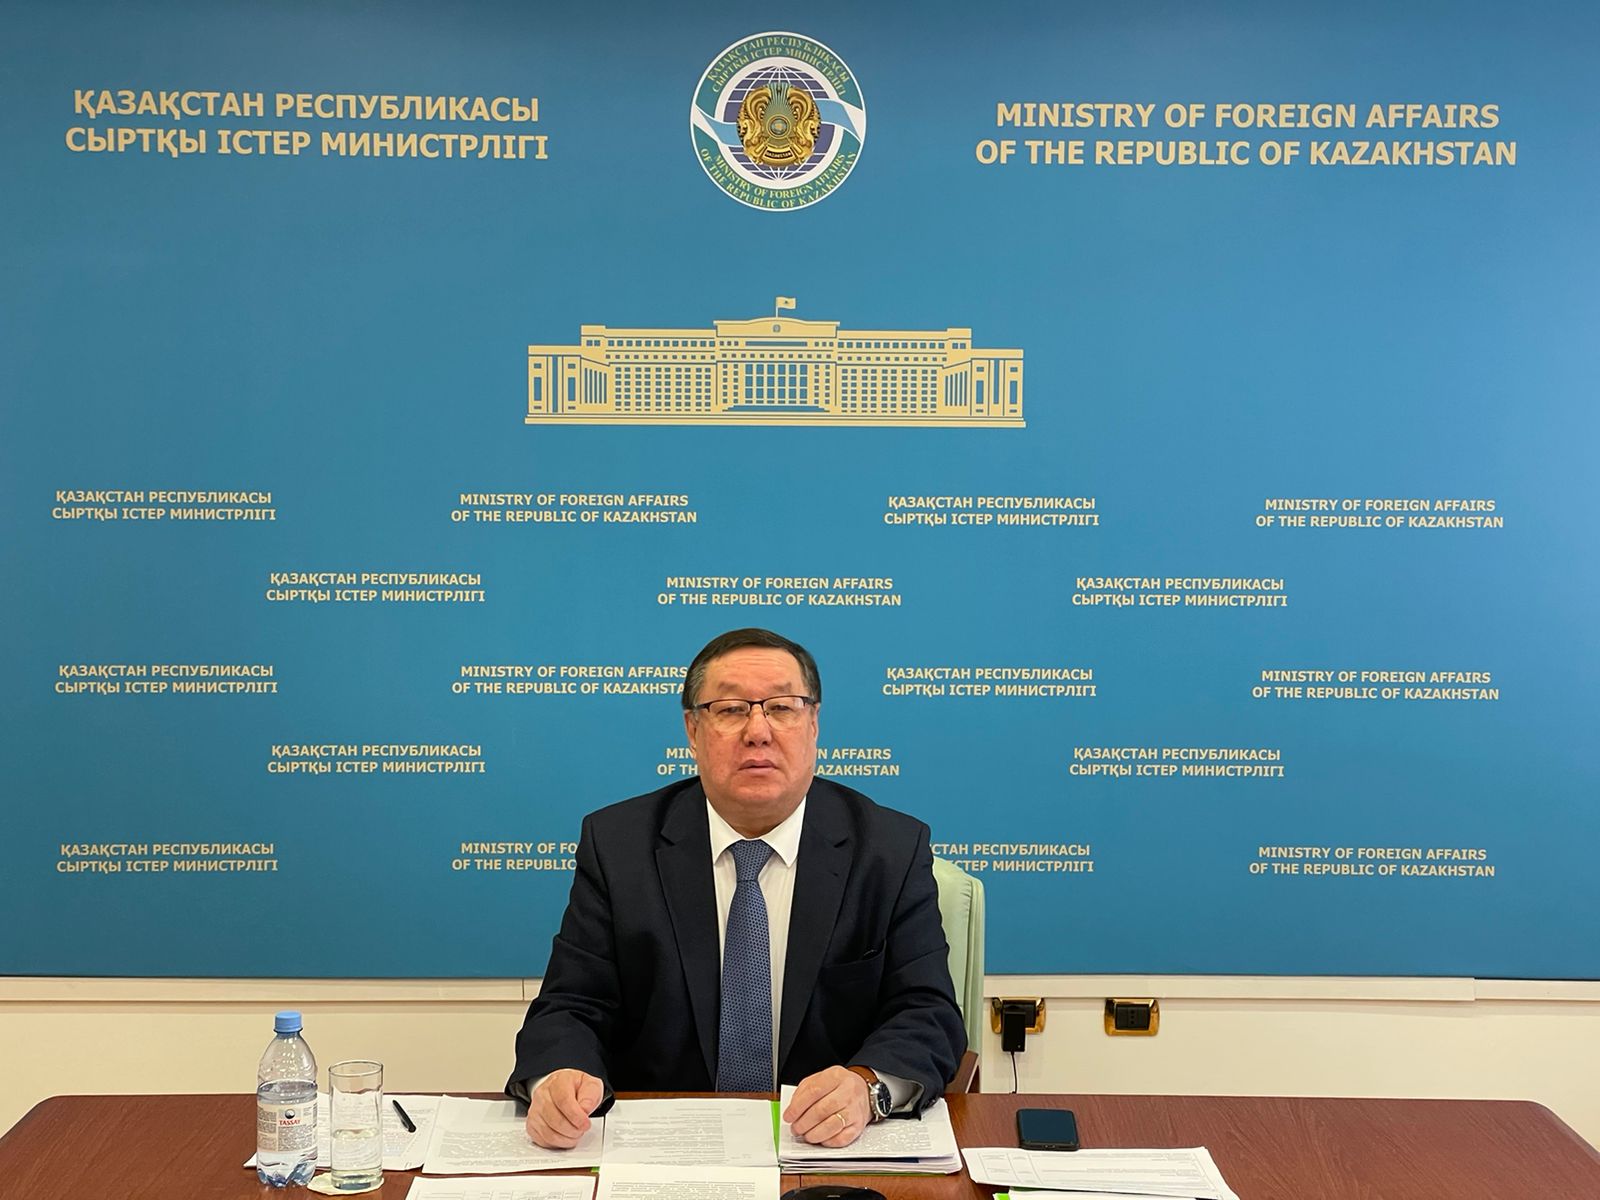 Dialogue Platform on Human Dimension under Kazakhstan’s Ministry of Foreign Affairs Discusses Gender Equality, Previous Recommendations, Interim Results of Consultative and Advisory Body’s Work